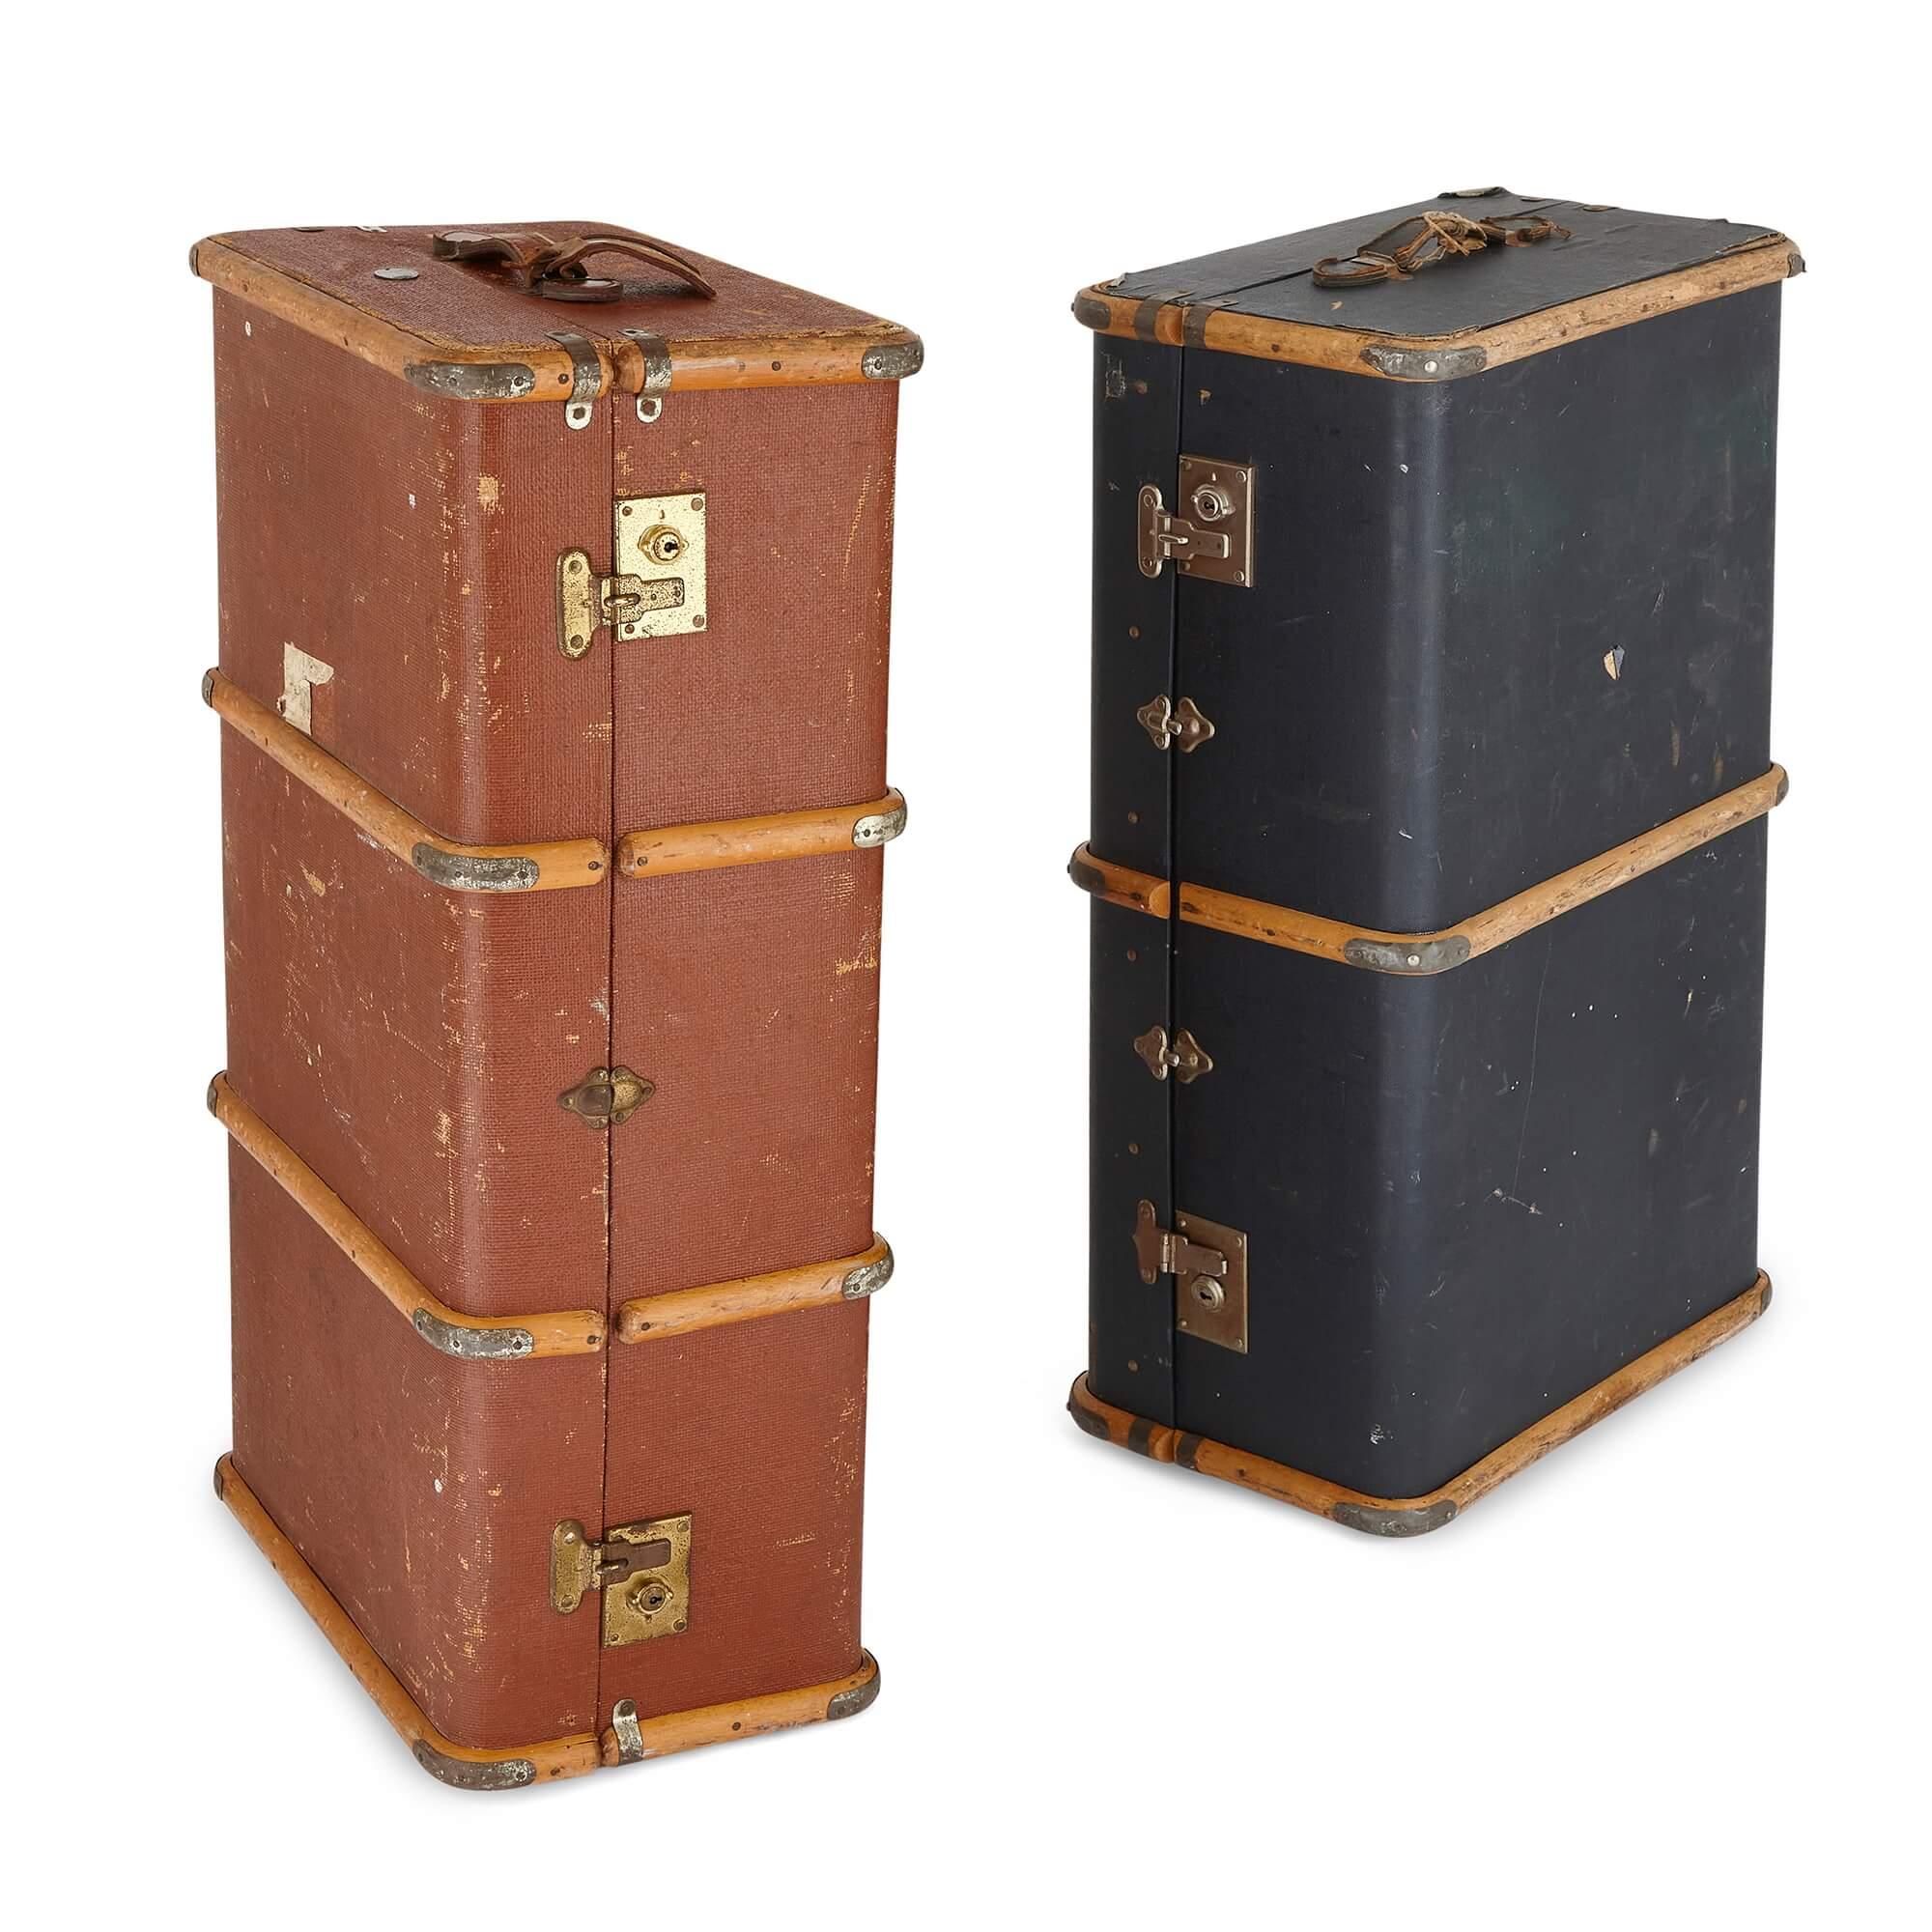 Pair of large vintage English travel cases made by Frenchs.
English, 20th Century.
Blue case: height 31cm, width 84cm, depth 51cm.
Red case: height 32cm, width 90cm, depth 51cm.

Dating to the early twentieth century, these intriguing pieces